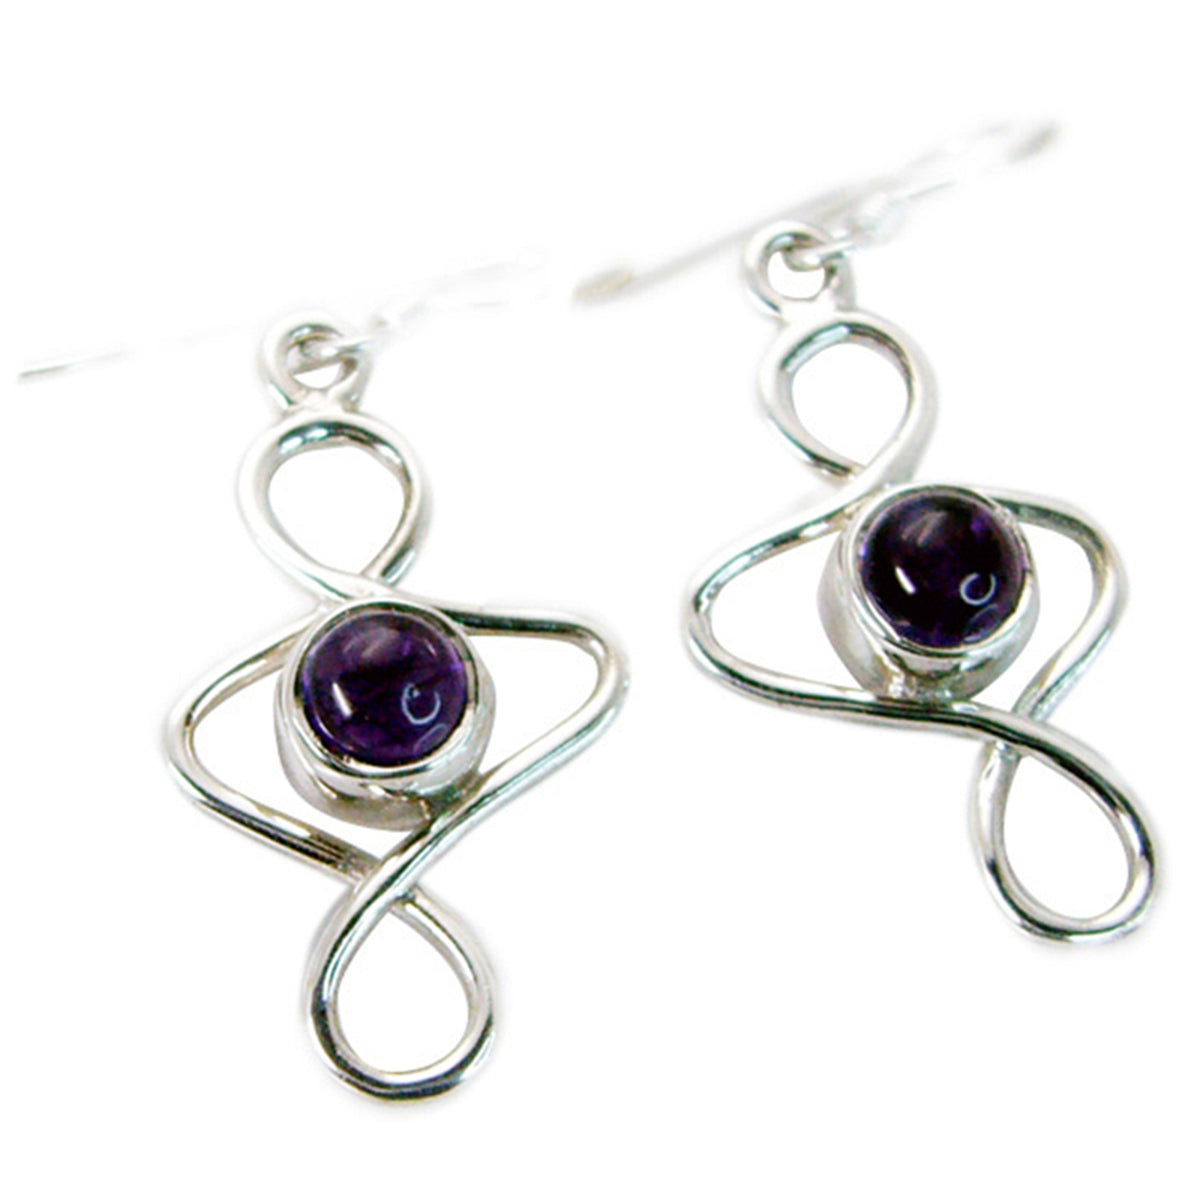 Riyo Real Gemstones round Cabochon Purple Amethyst Silver Earring mother's day gift